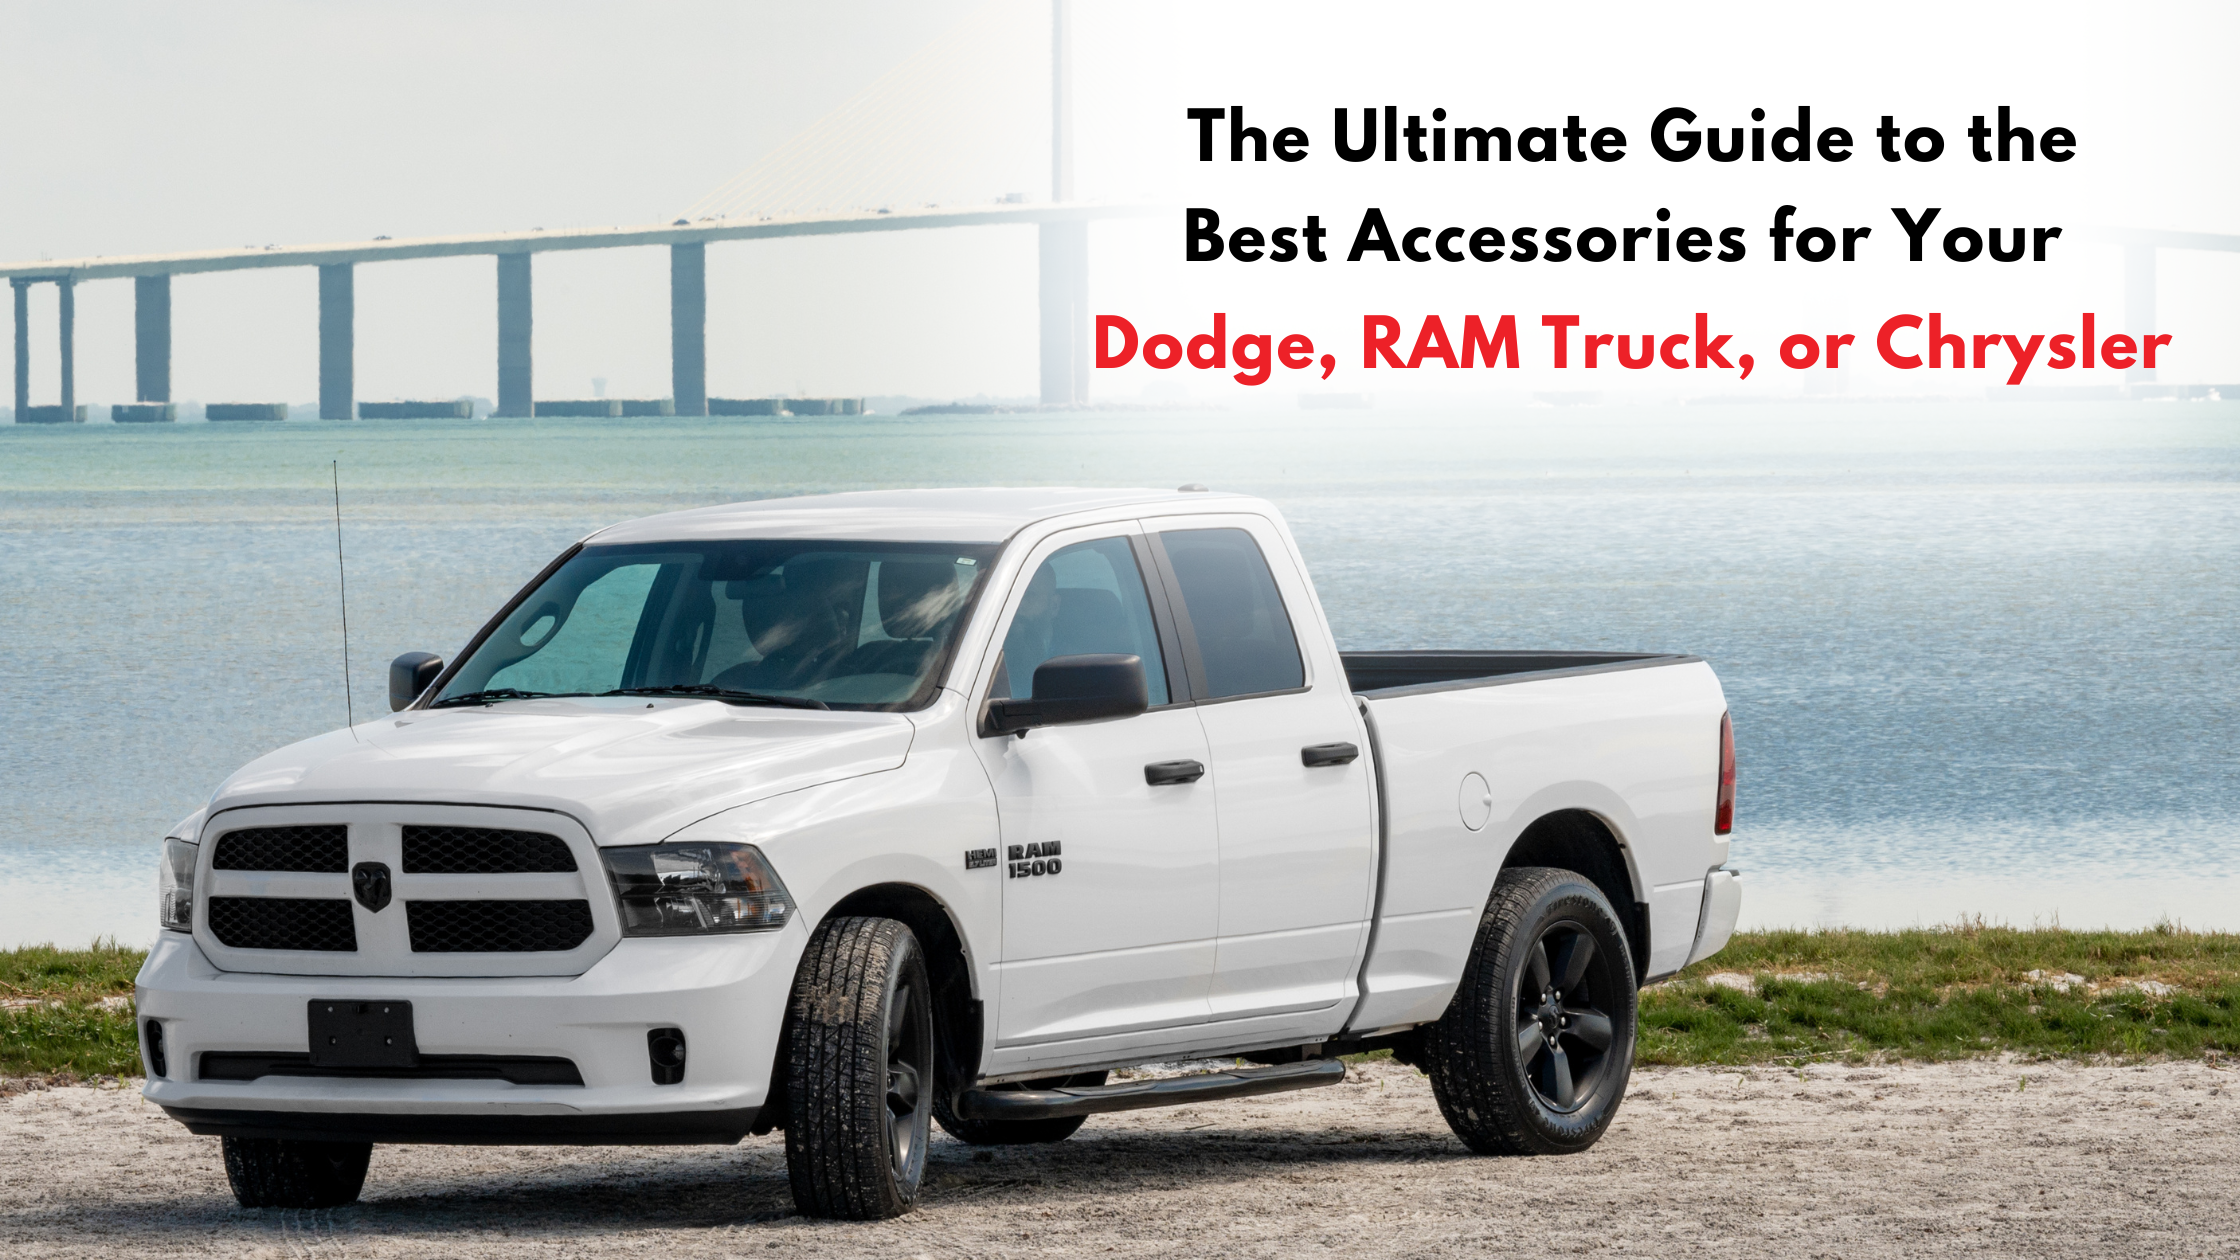 The Ultimate Guide to the Best Accessories for Your Dodge, RAM Truck, or Chrysler